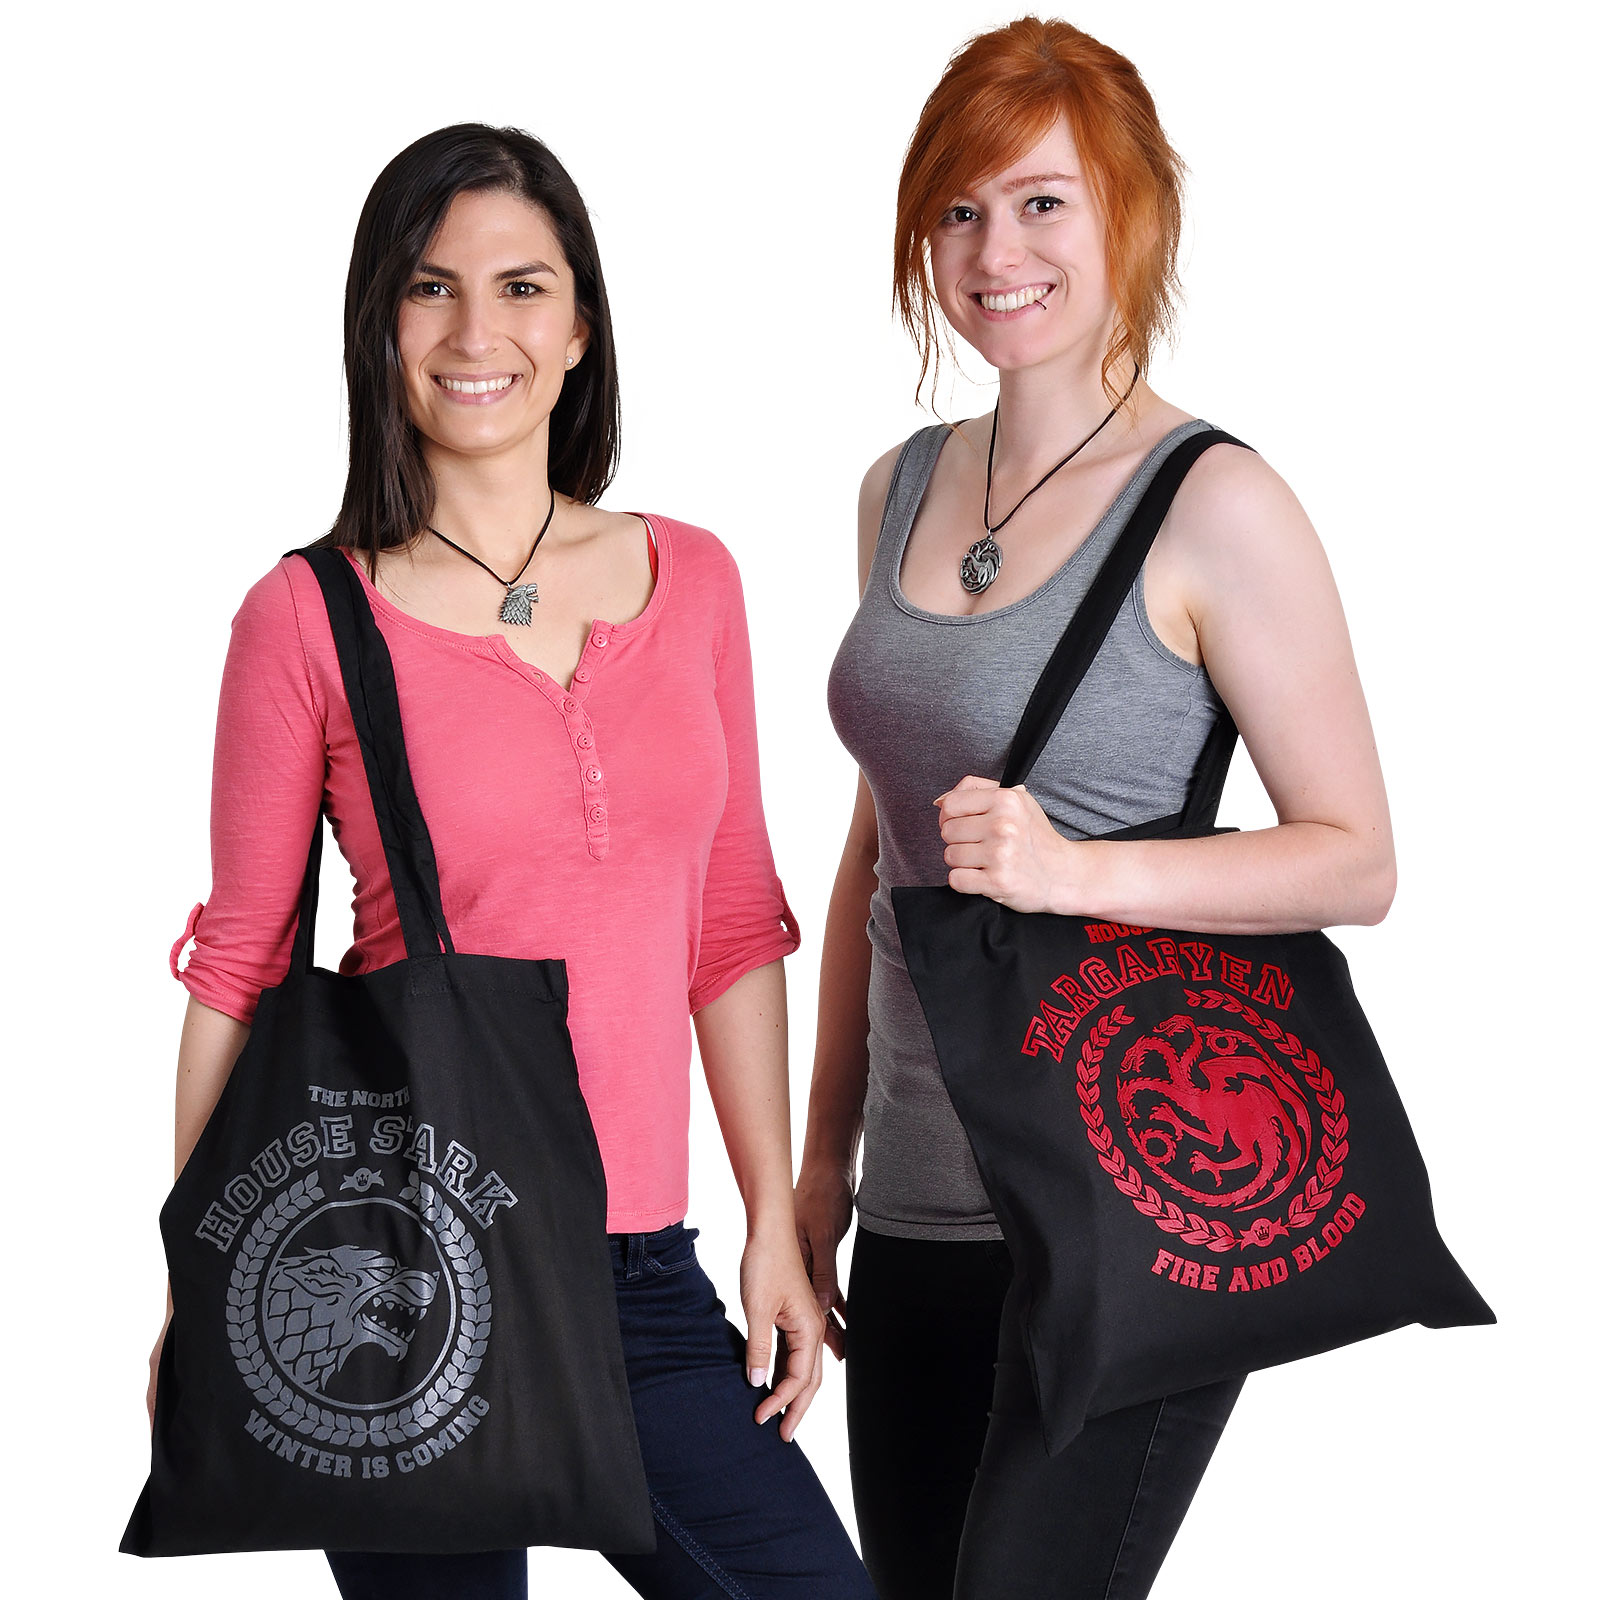 Game of Thrones - Stark Coat of Arms Tote Bag